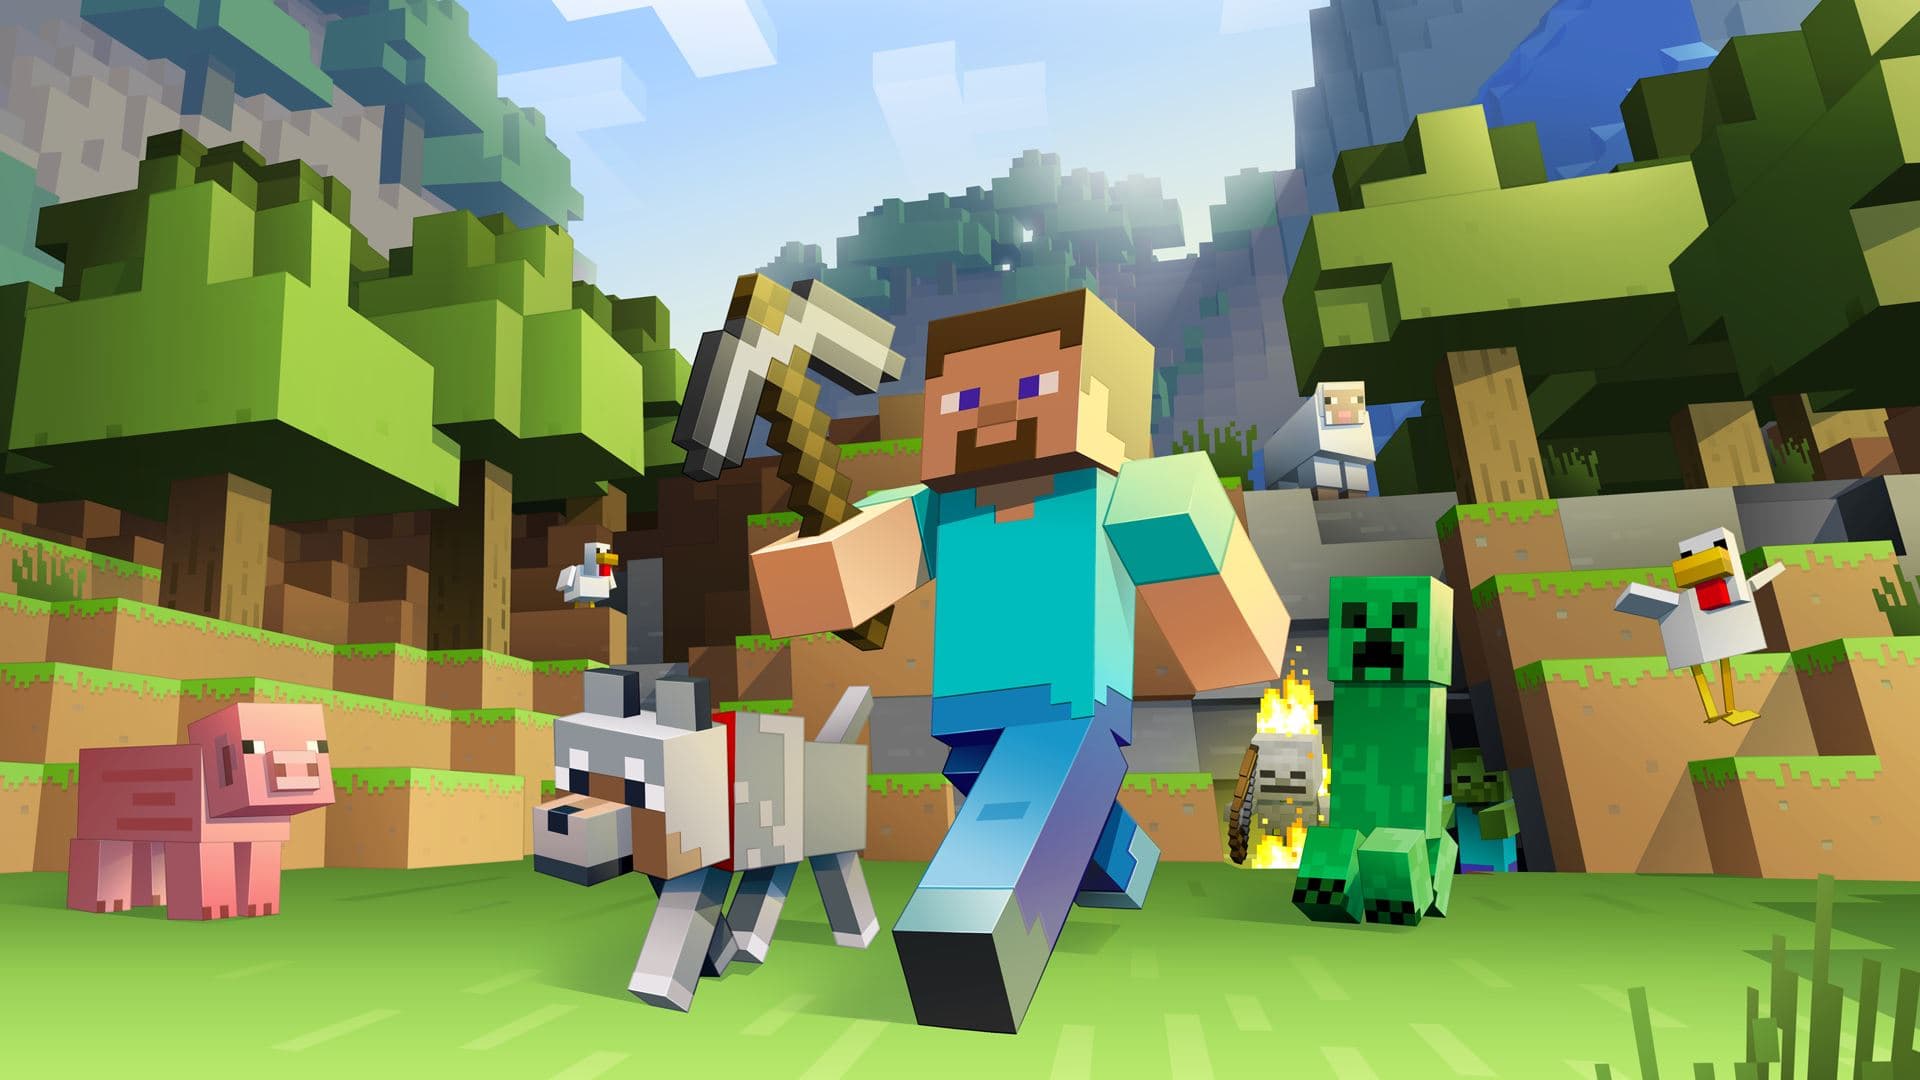 Minecraft is a rare game that never stops growing